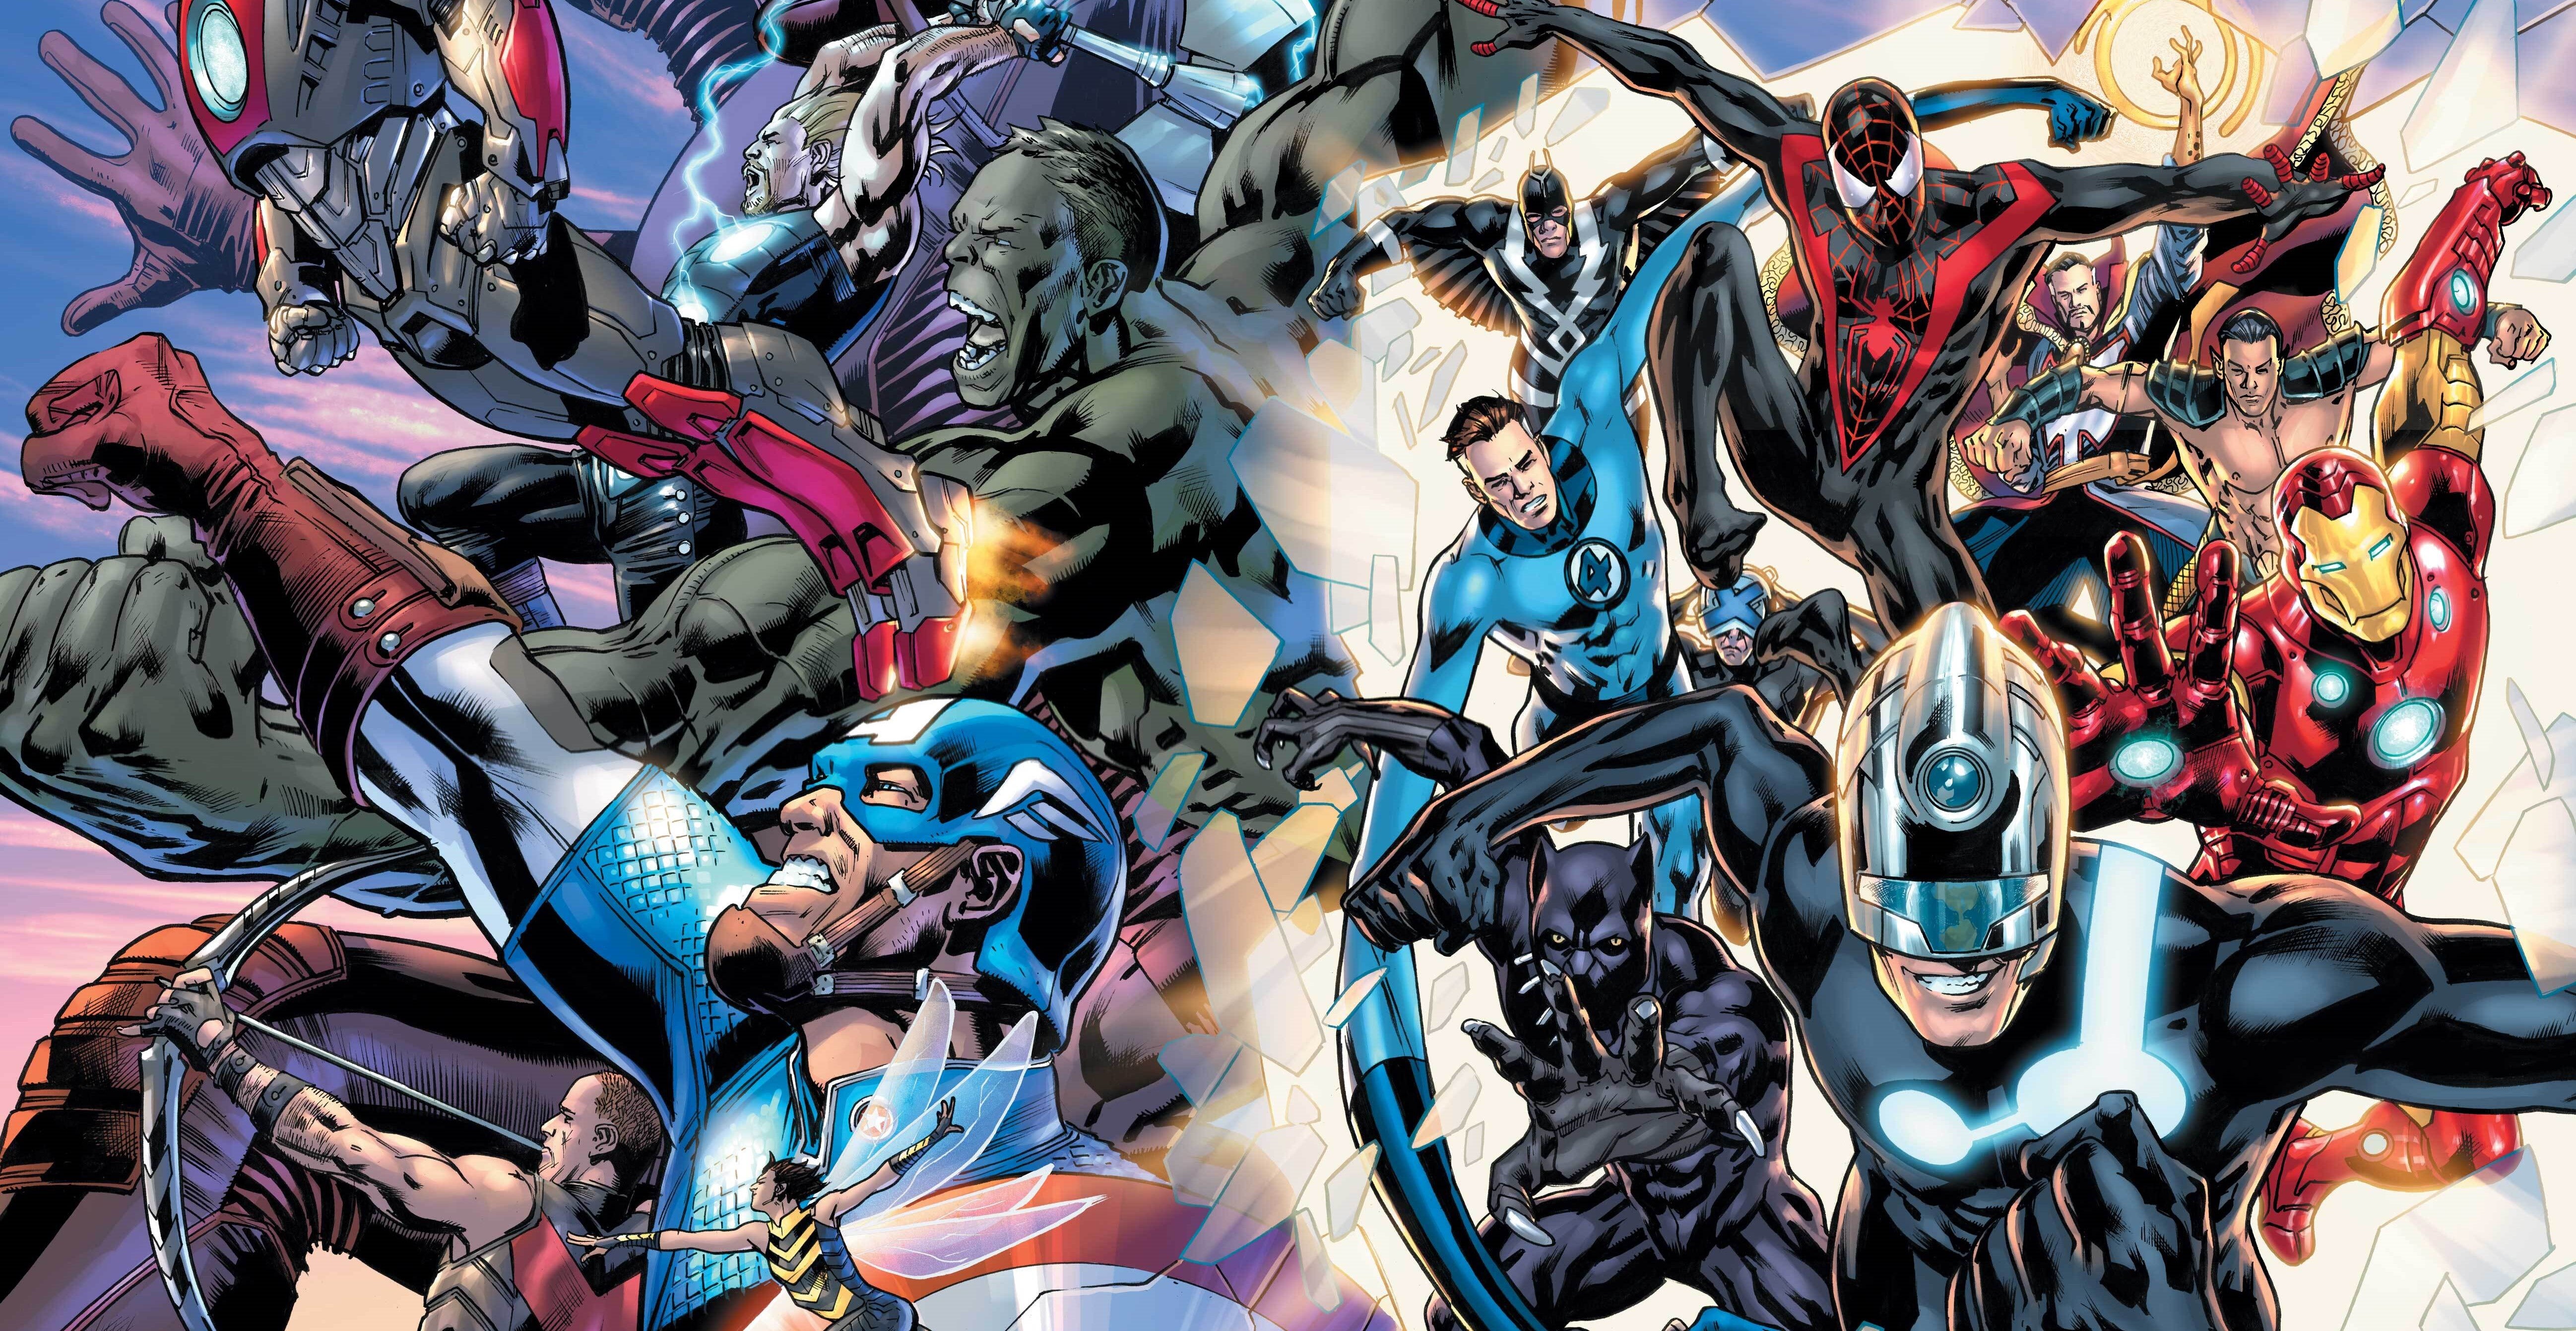 Cropped cover image of Ultimate Invasion featuring Marvel superheroes in fighting poses